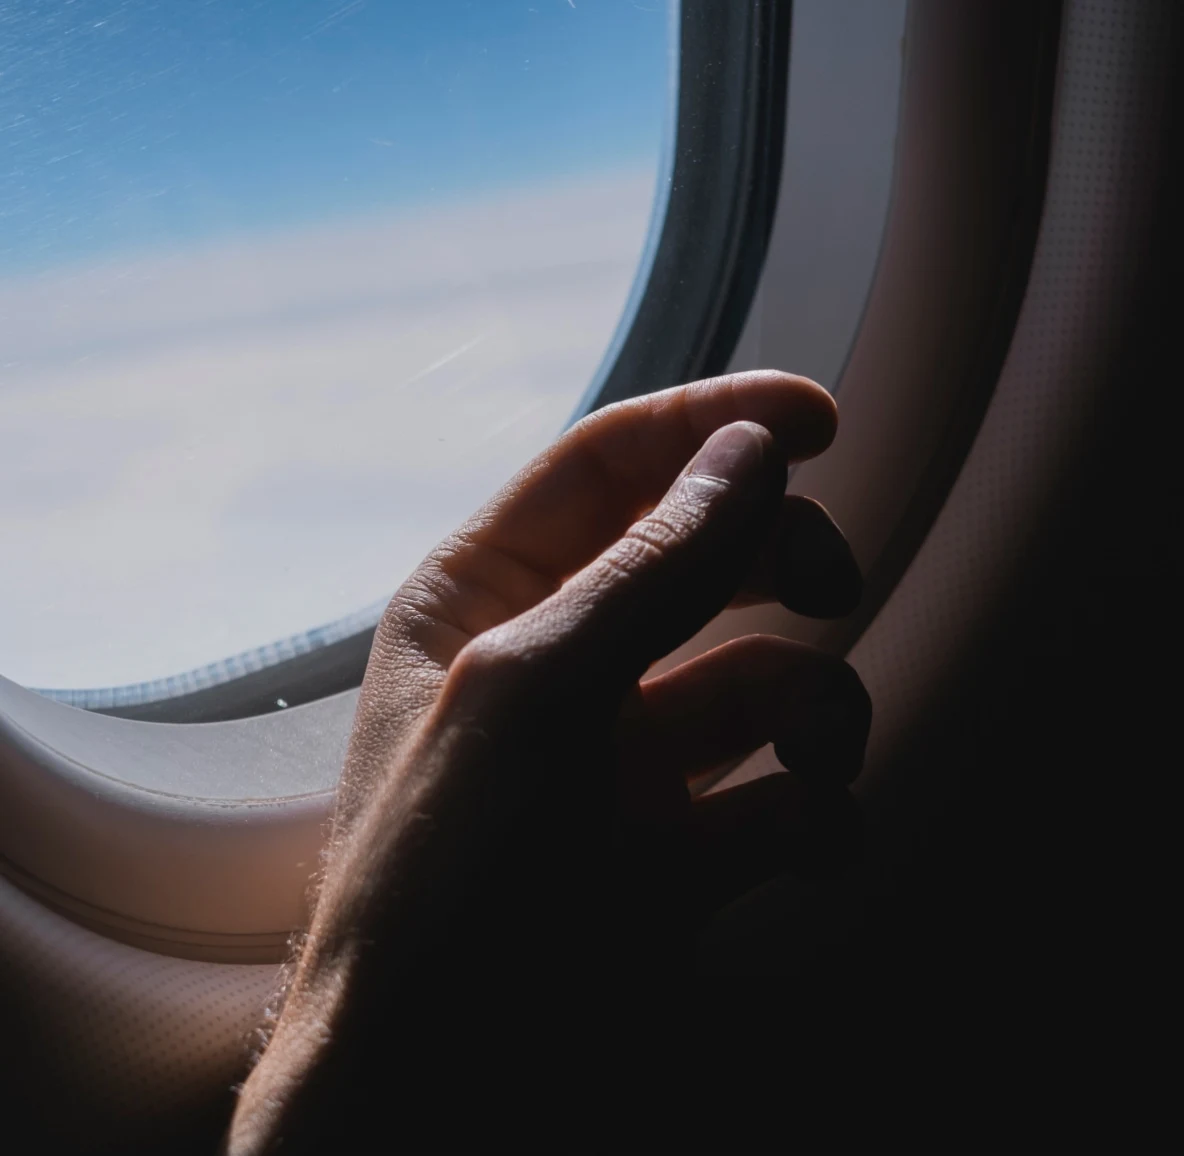 A hand in the shadow of an airplane window, clouds and blue sky in the background